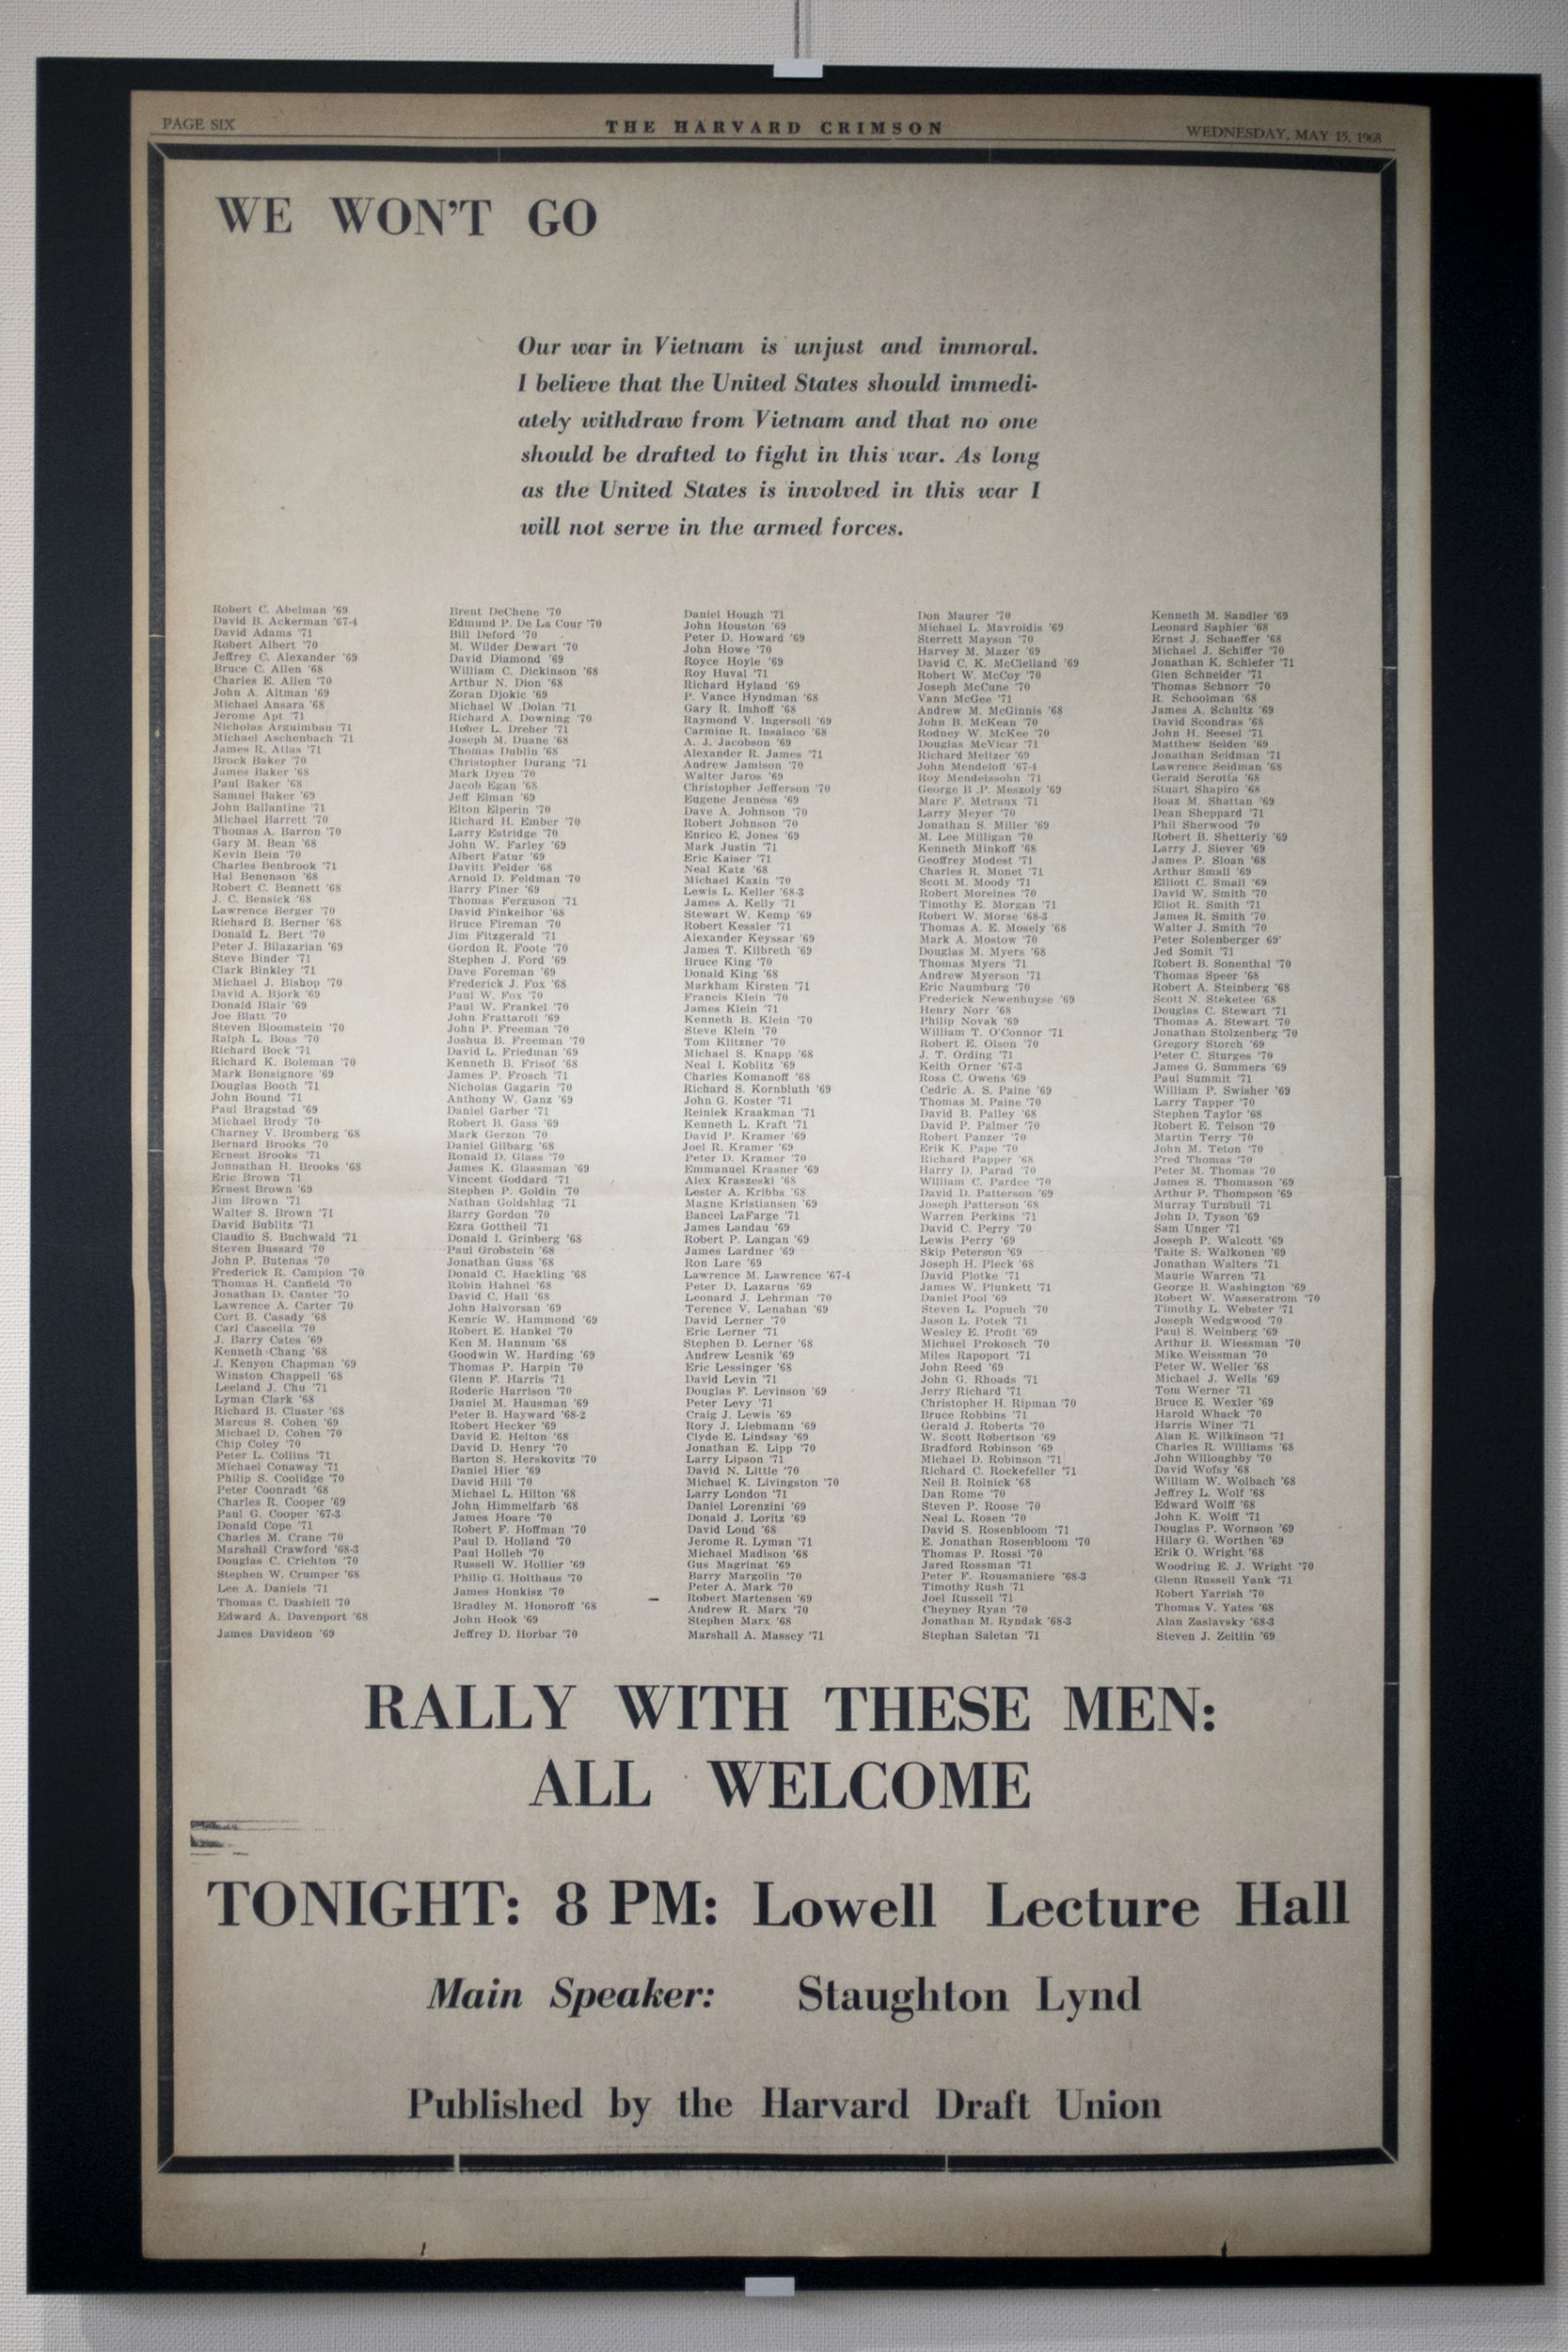 List of Harvard draft protesters in 1968.